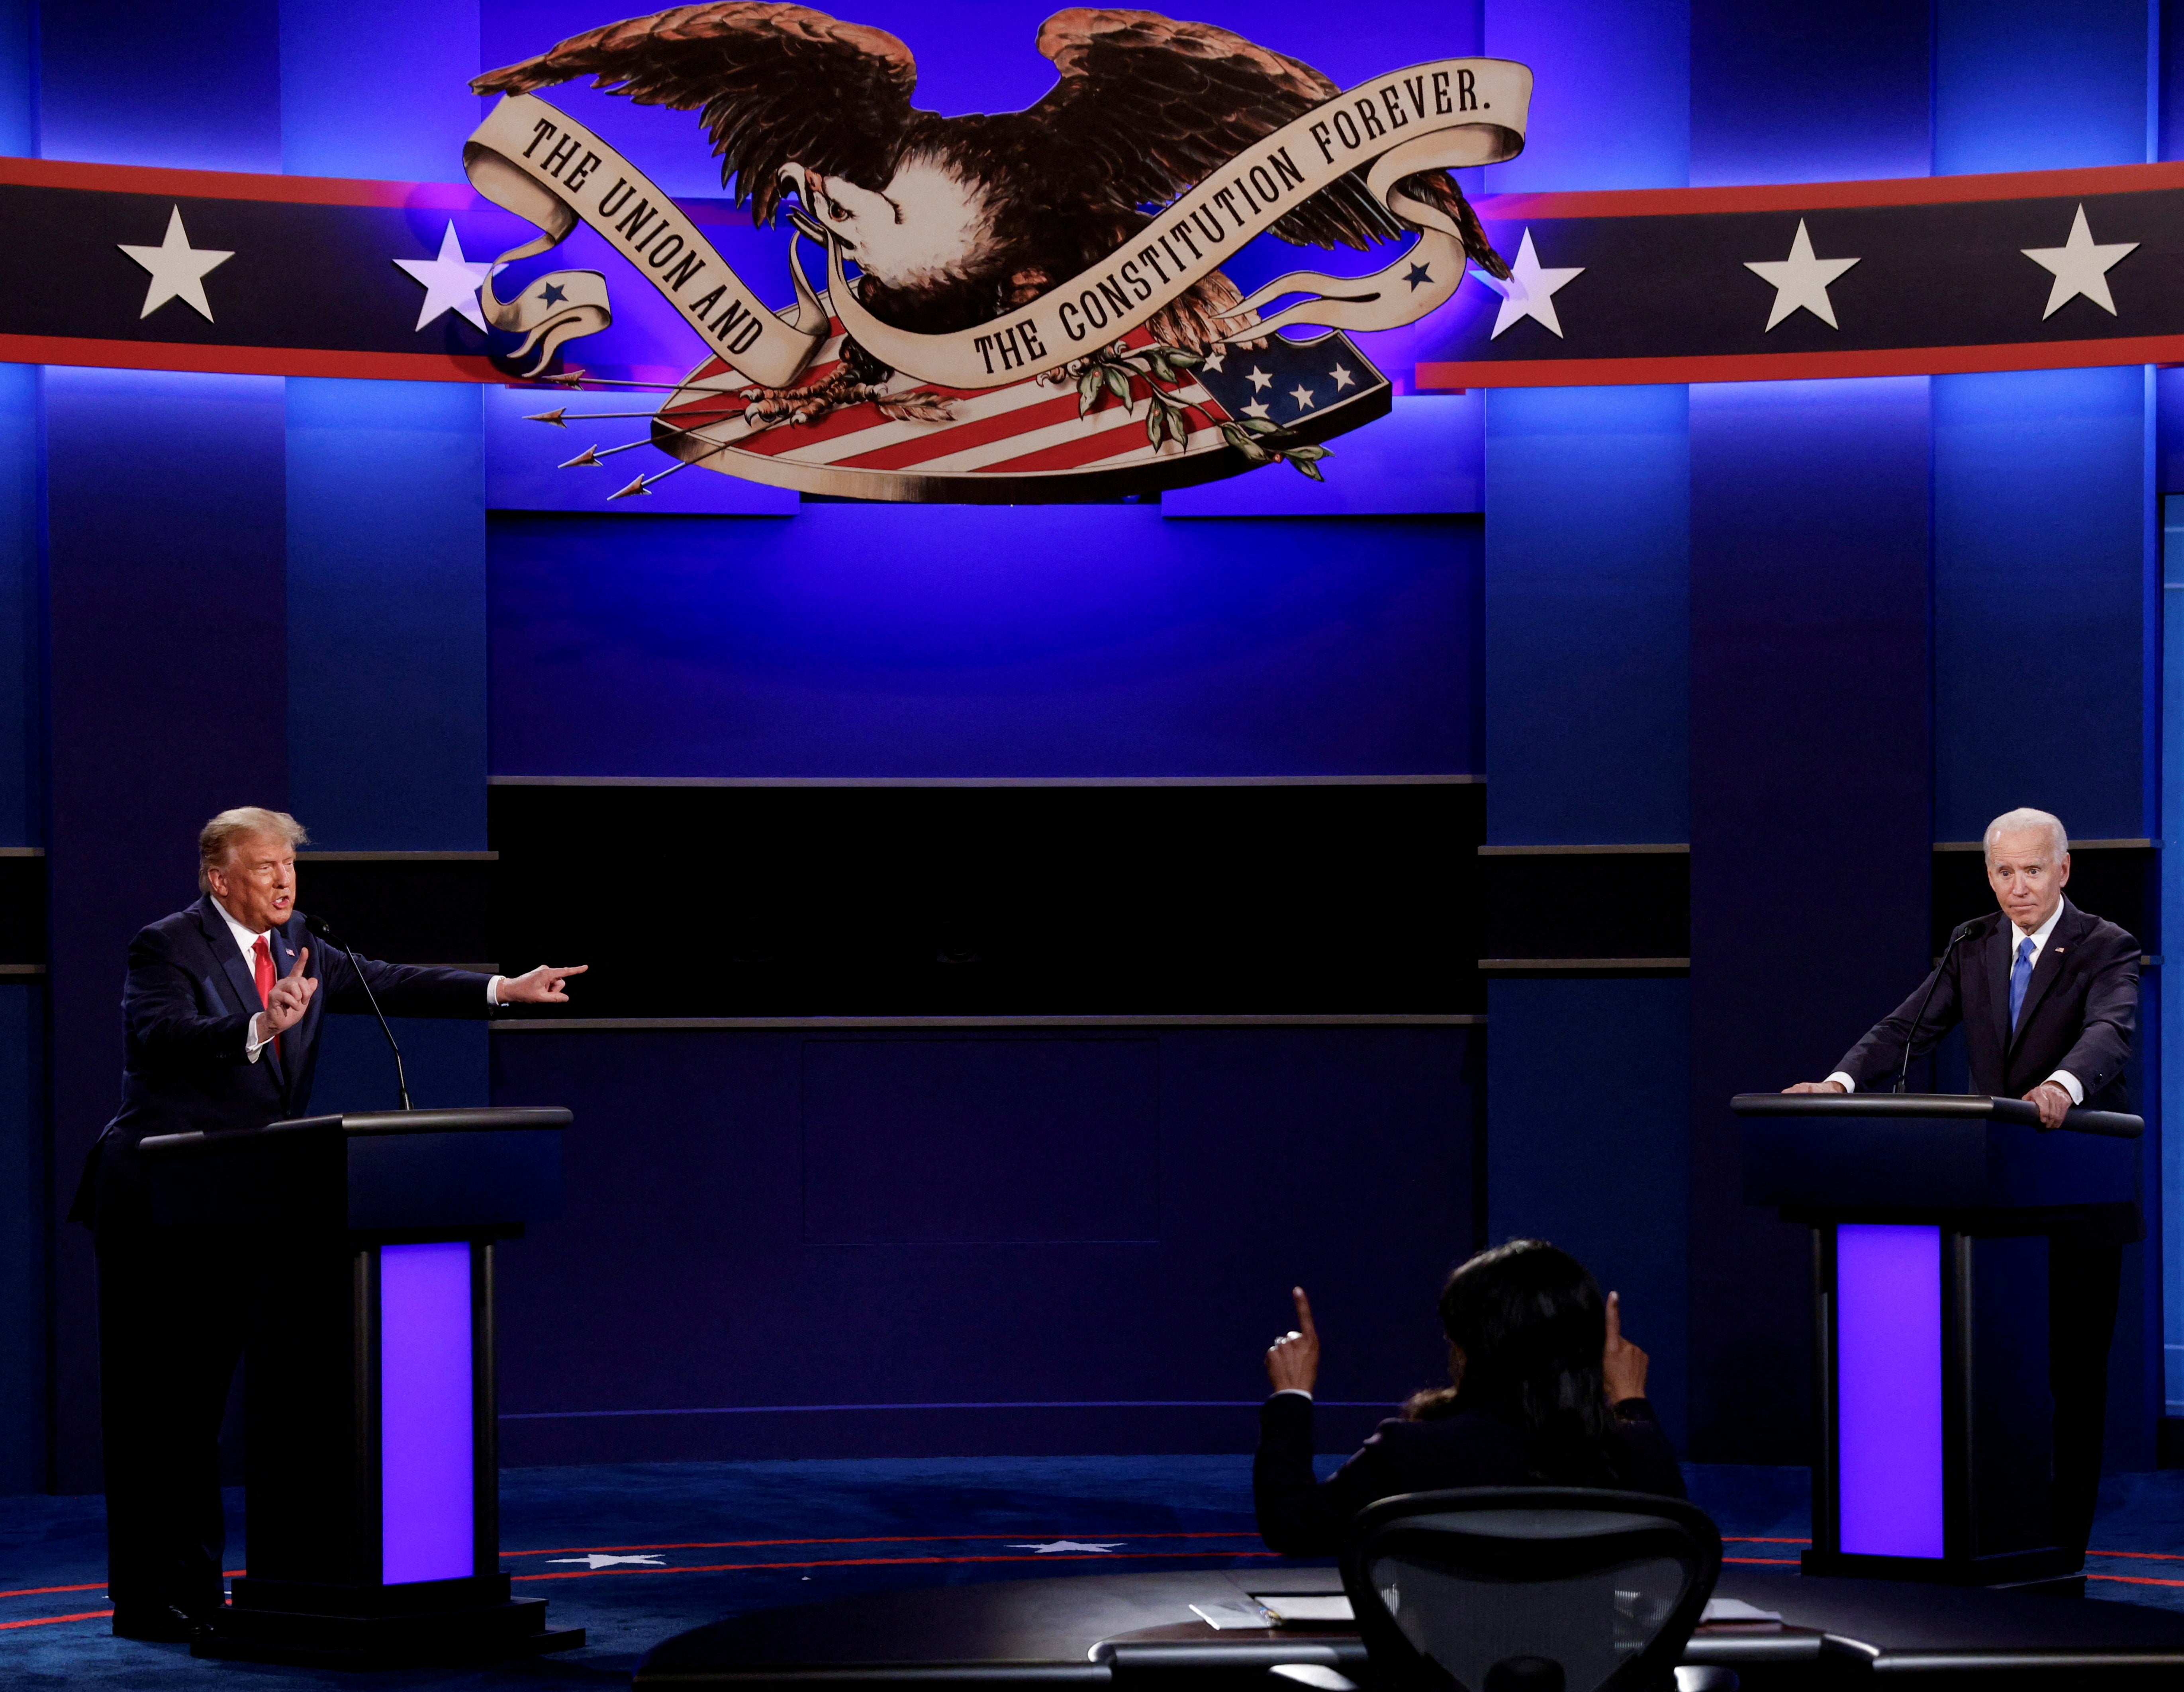 Trump and Biden face-off during the 2020 presidential debate